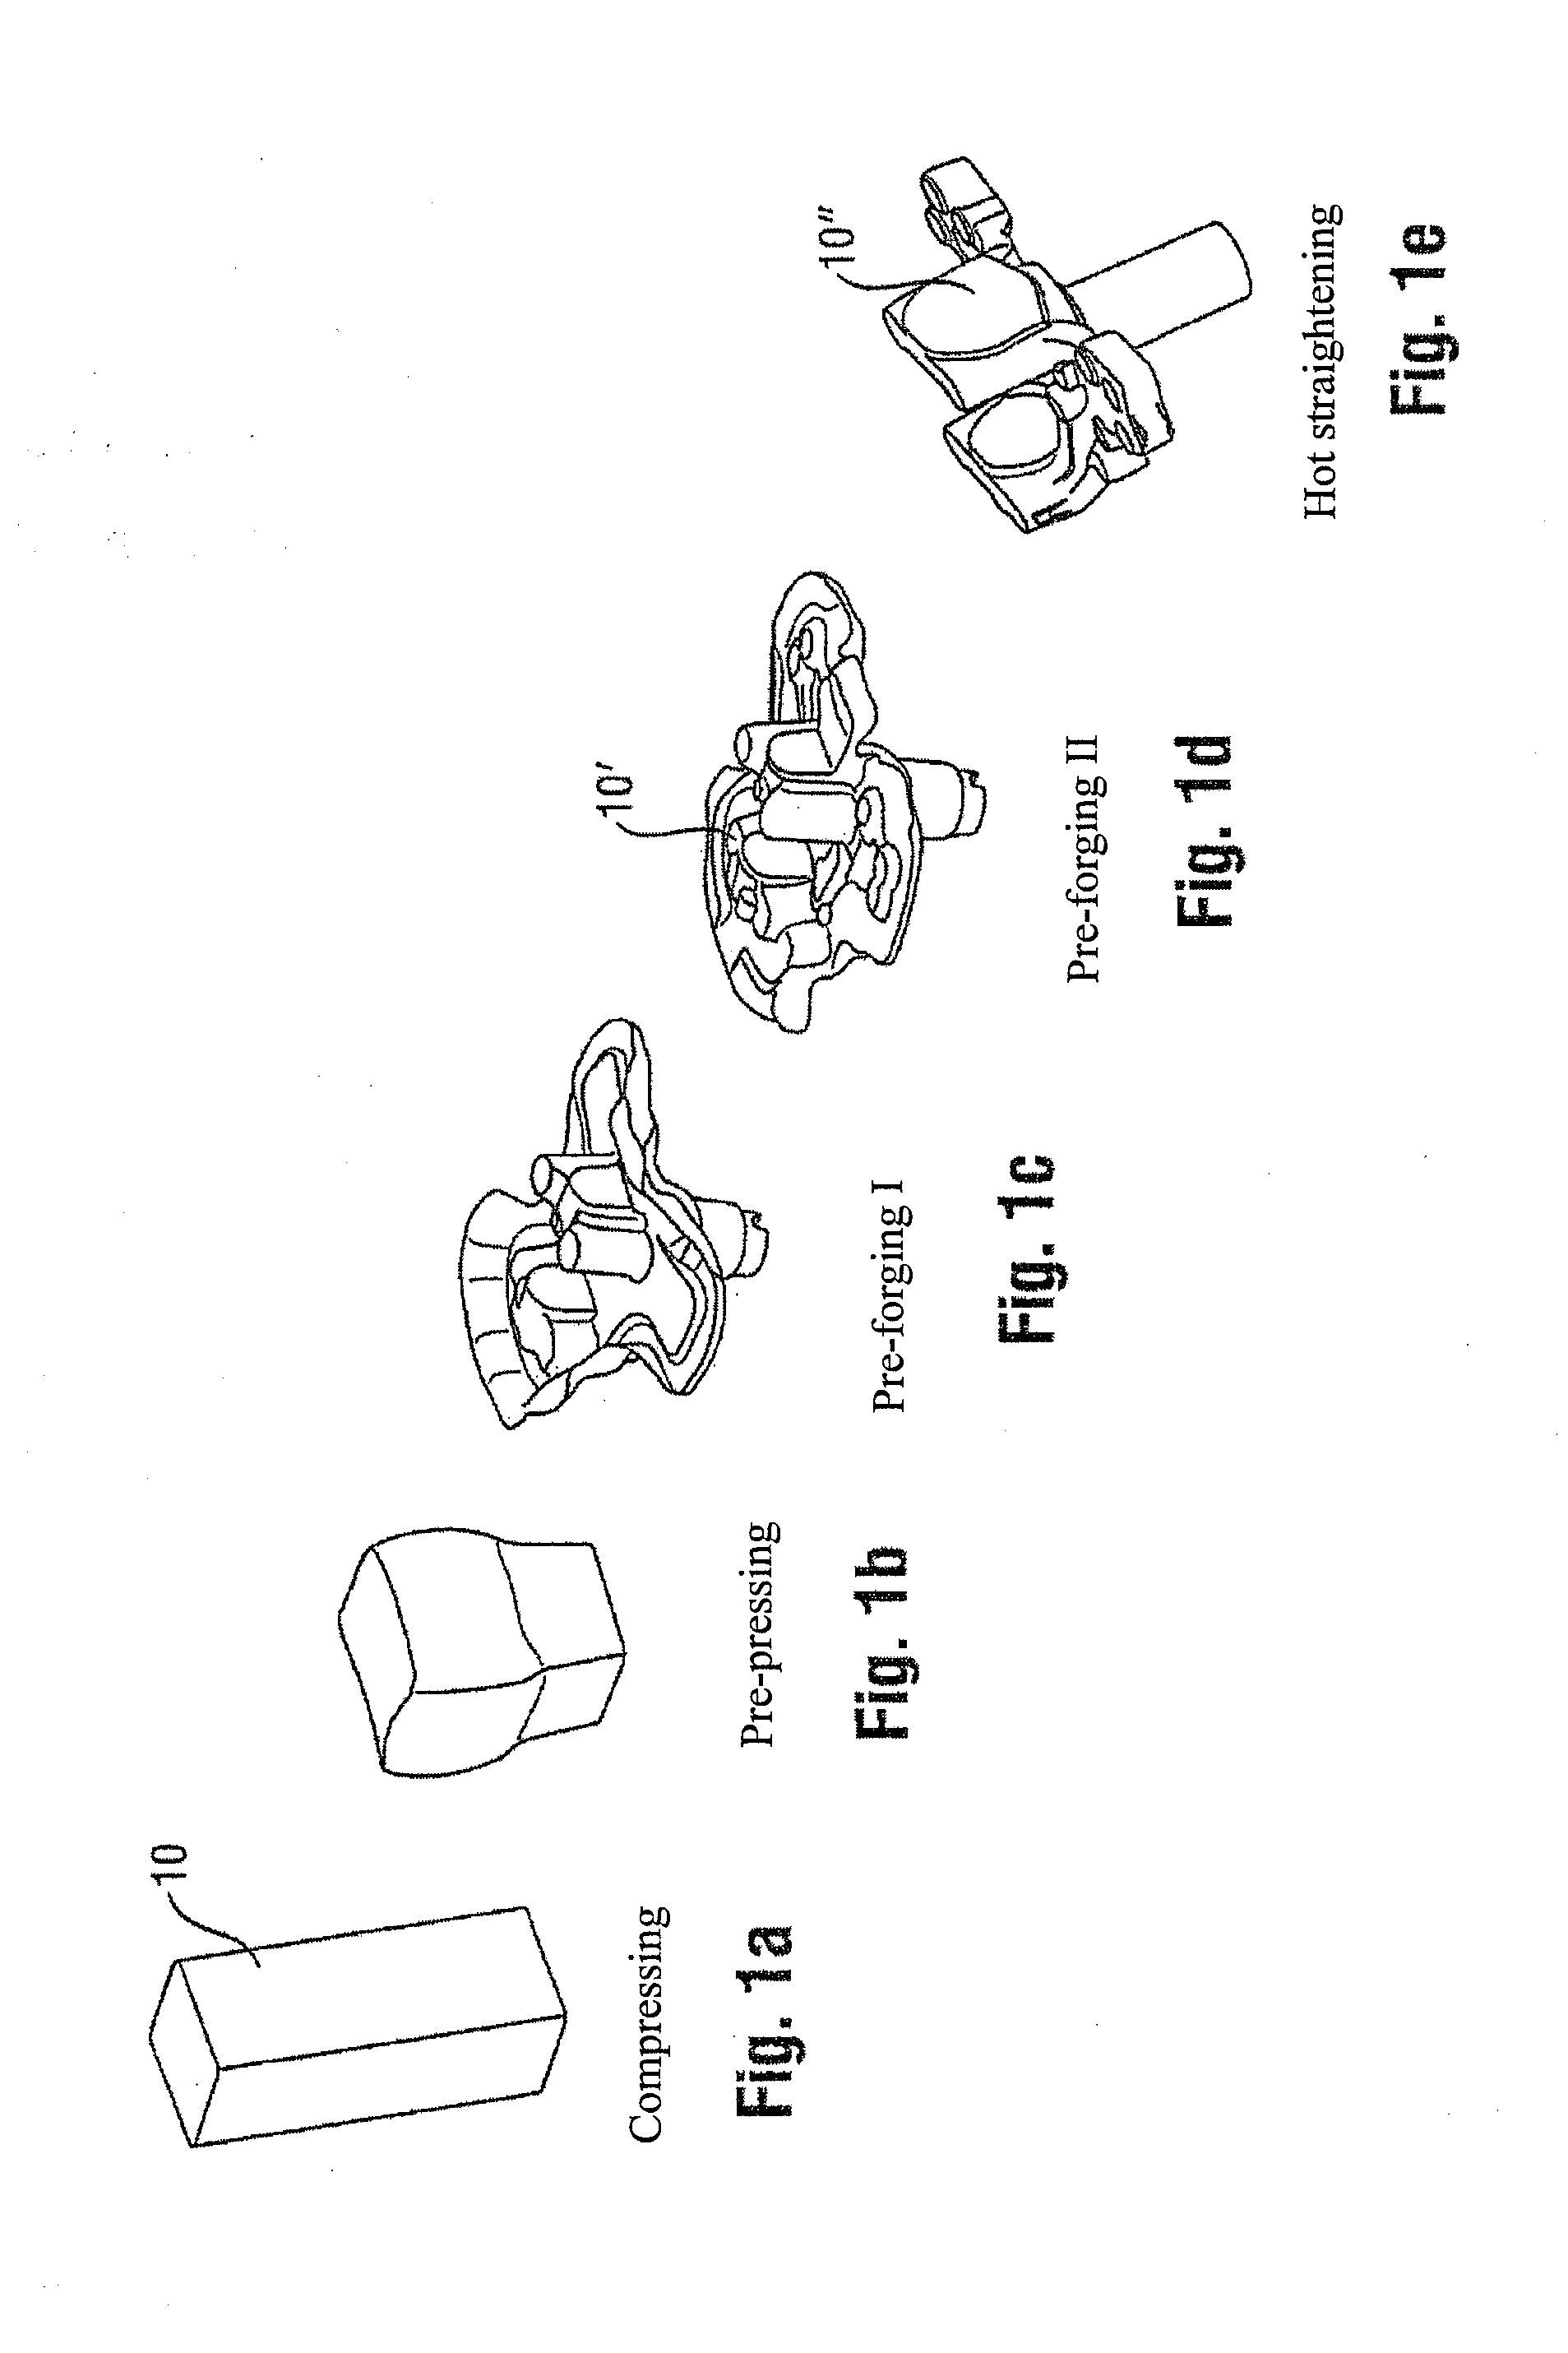 Method for forming forged parts